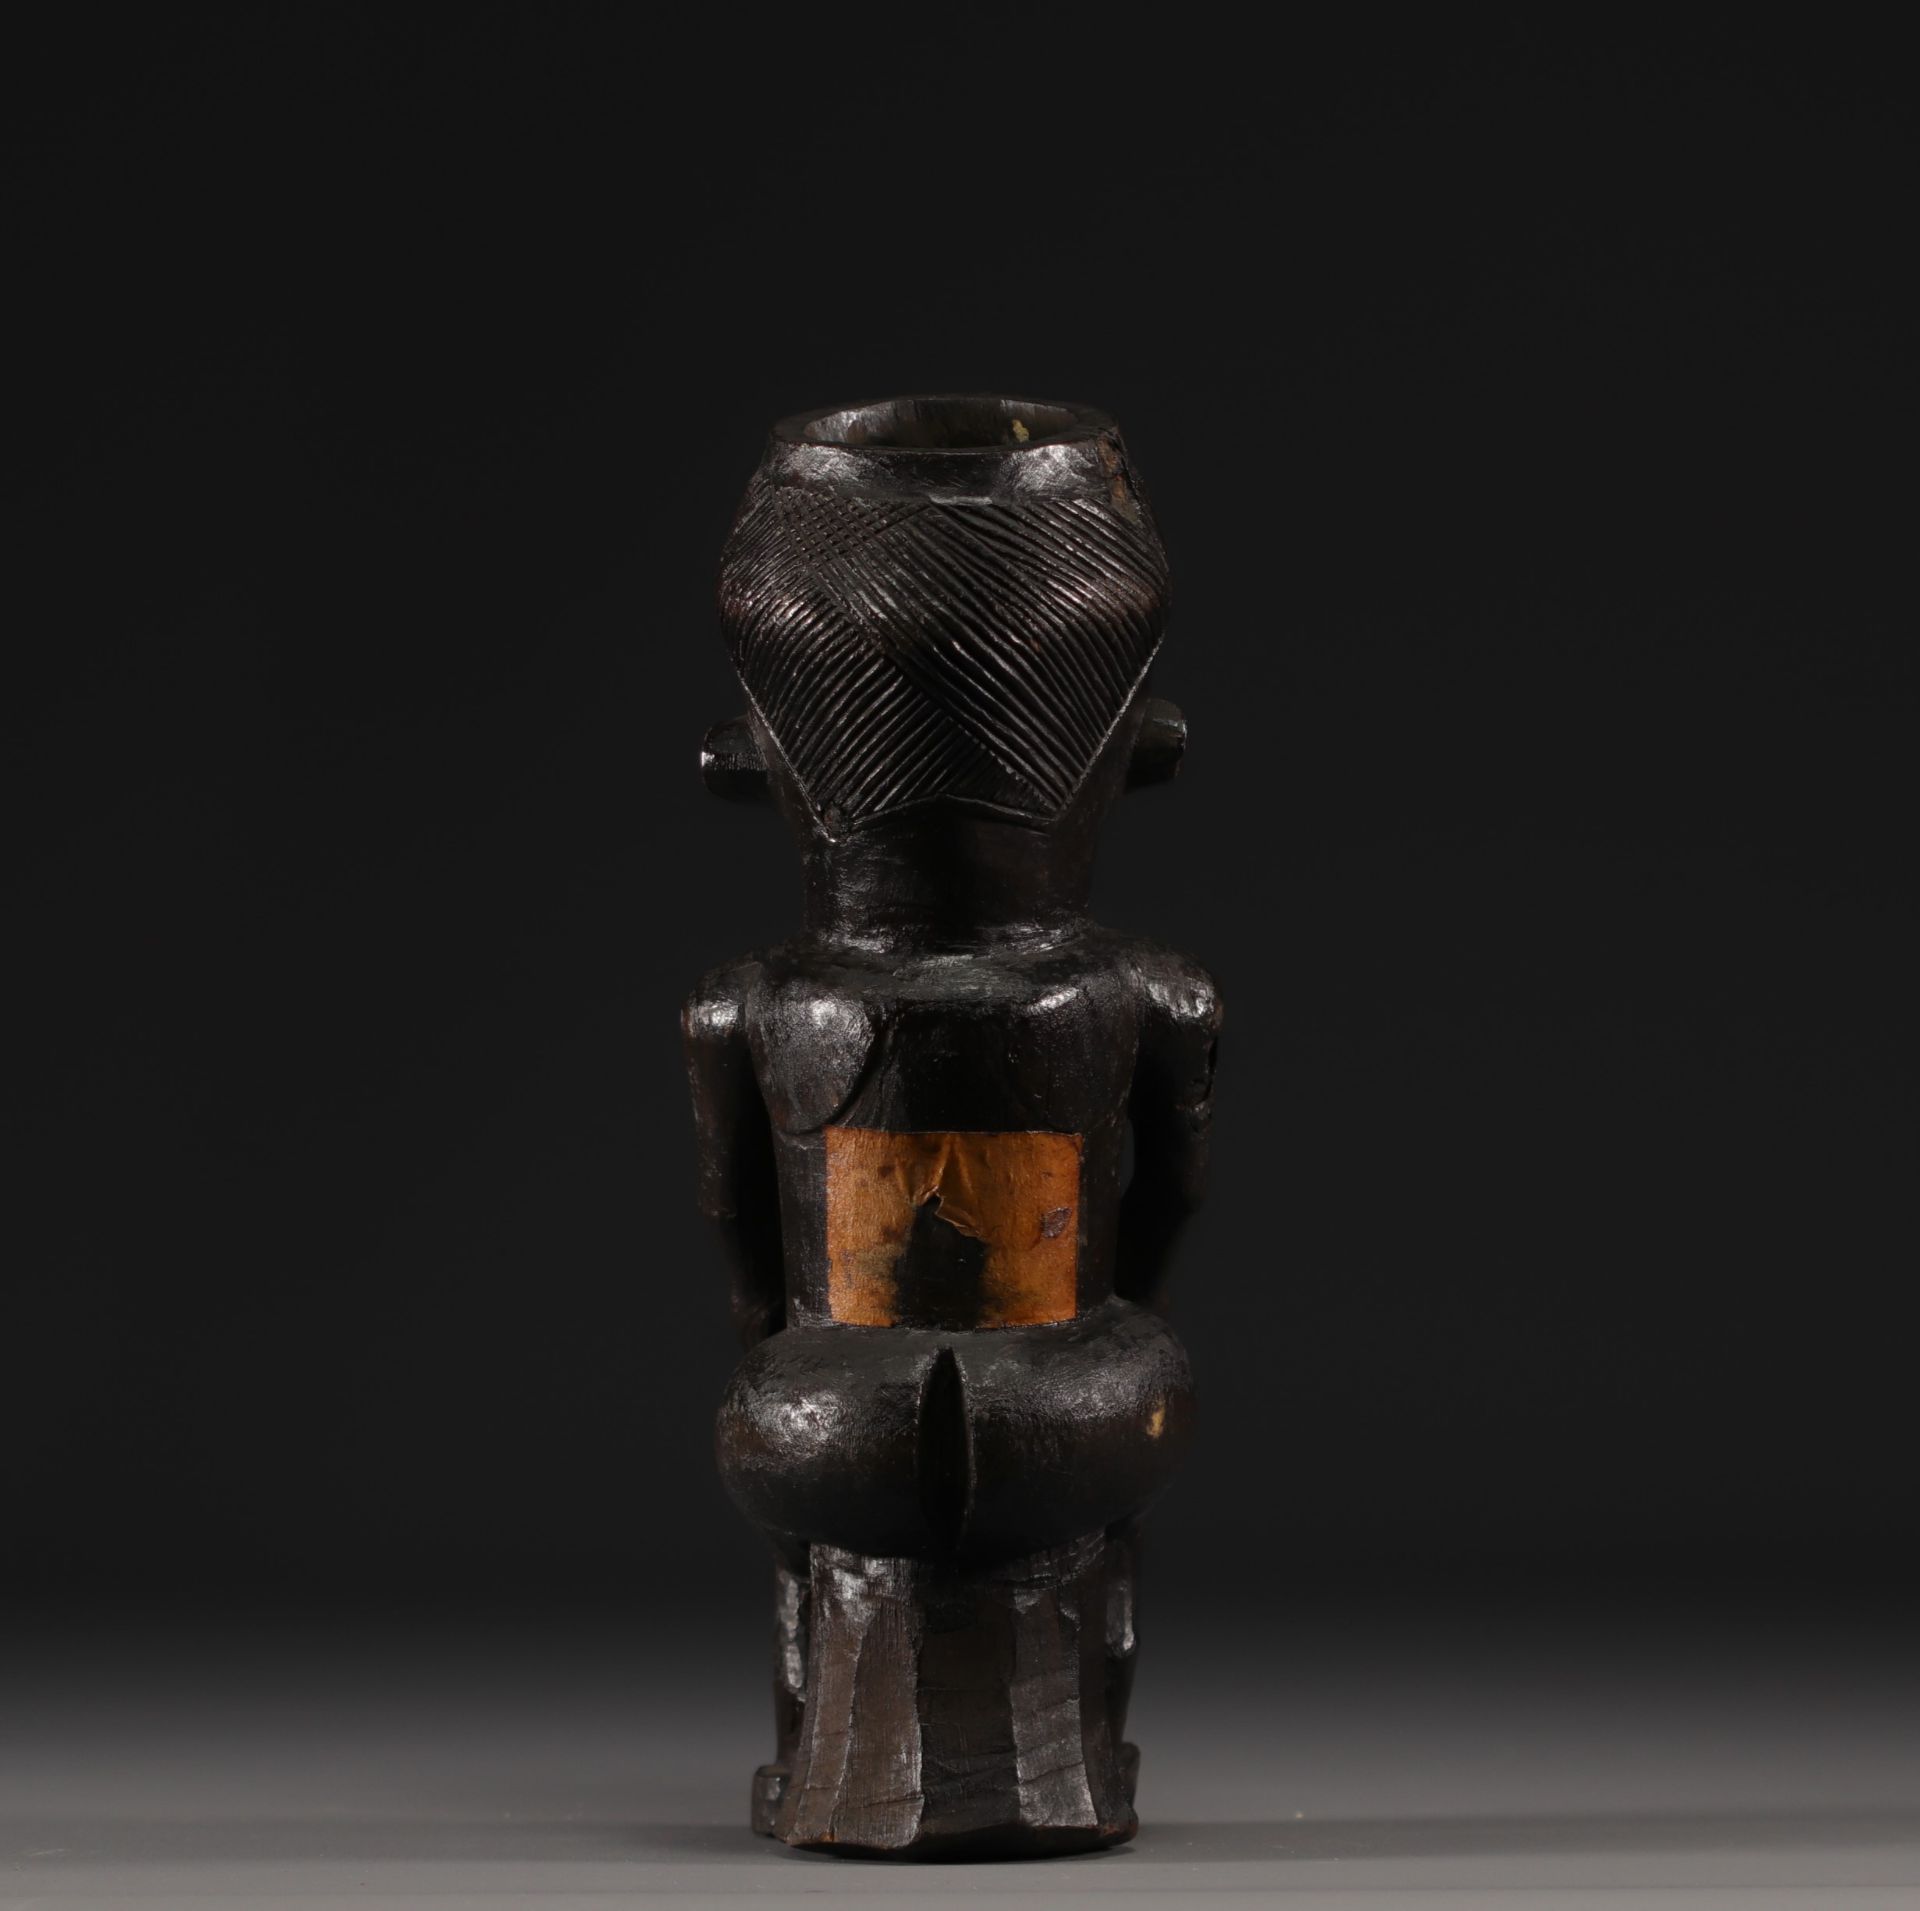 Large Kuba cup depicting a seated figure - Rep.Dem.Congo - Image 4 of 4